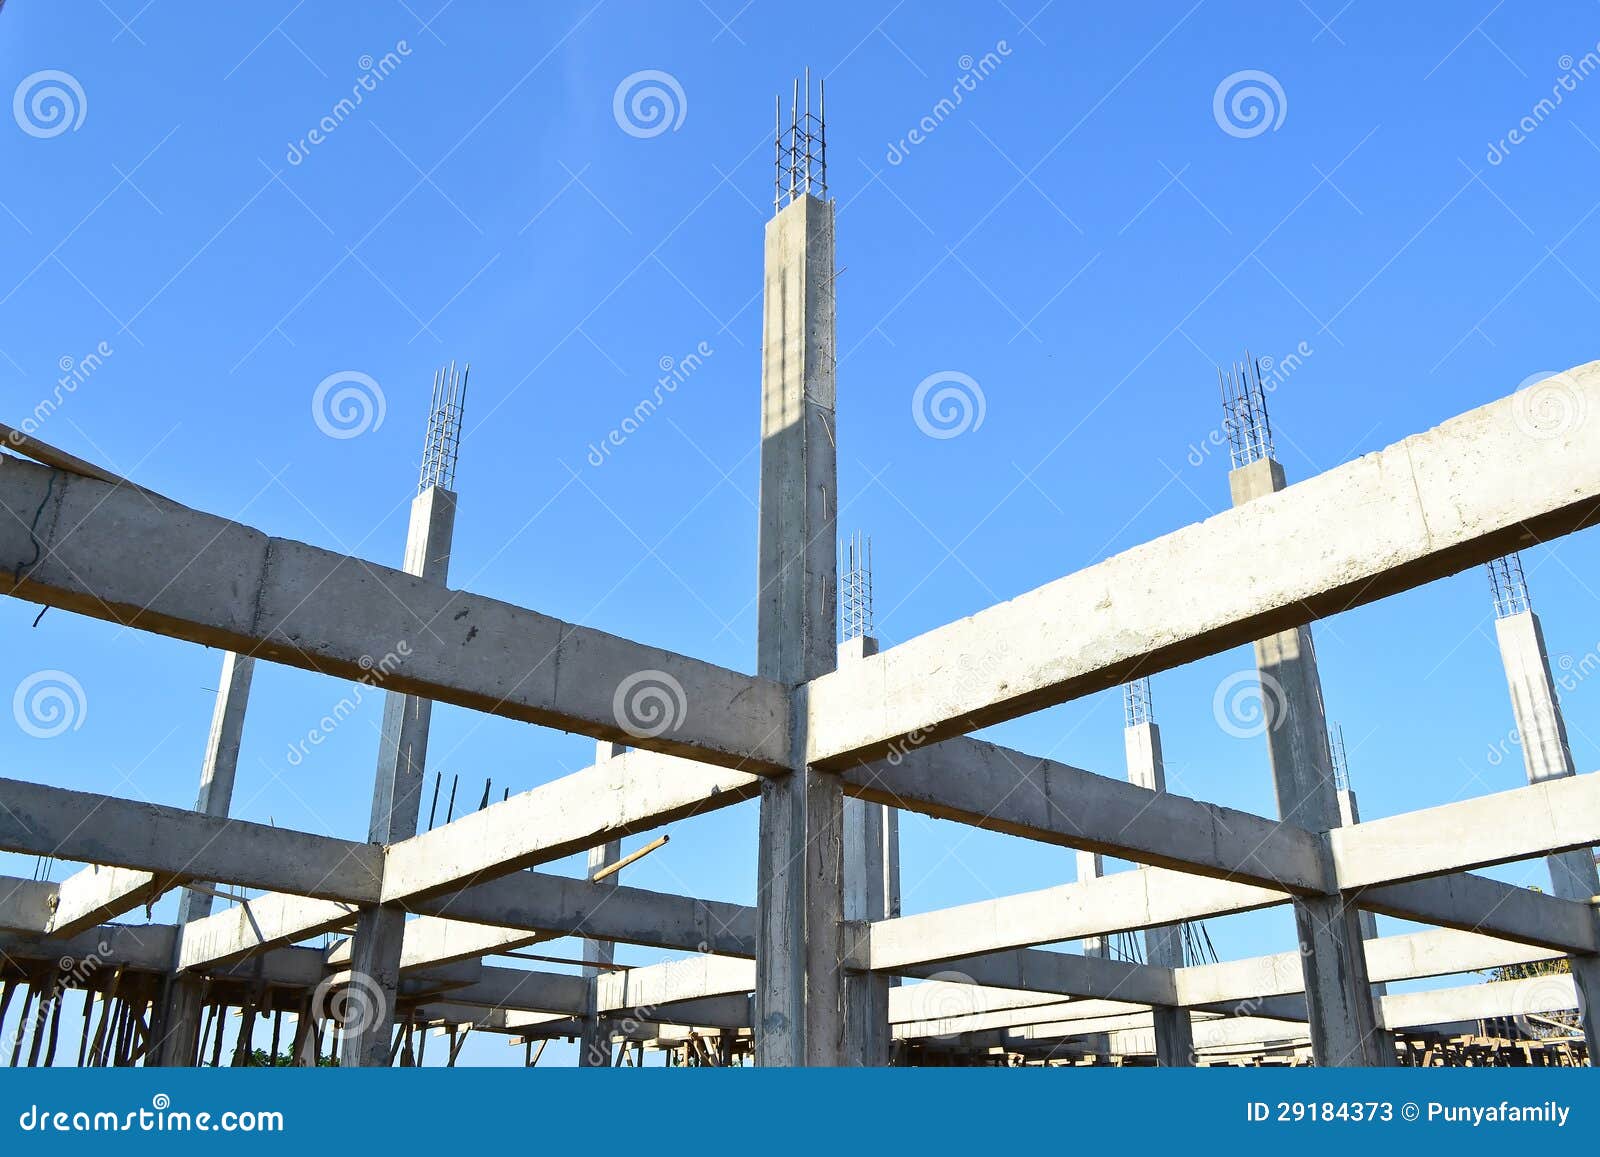 building construct site and blue sky